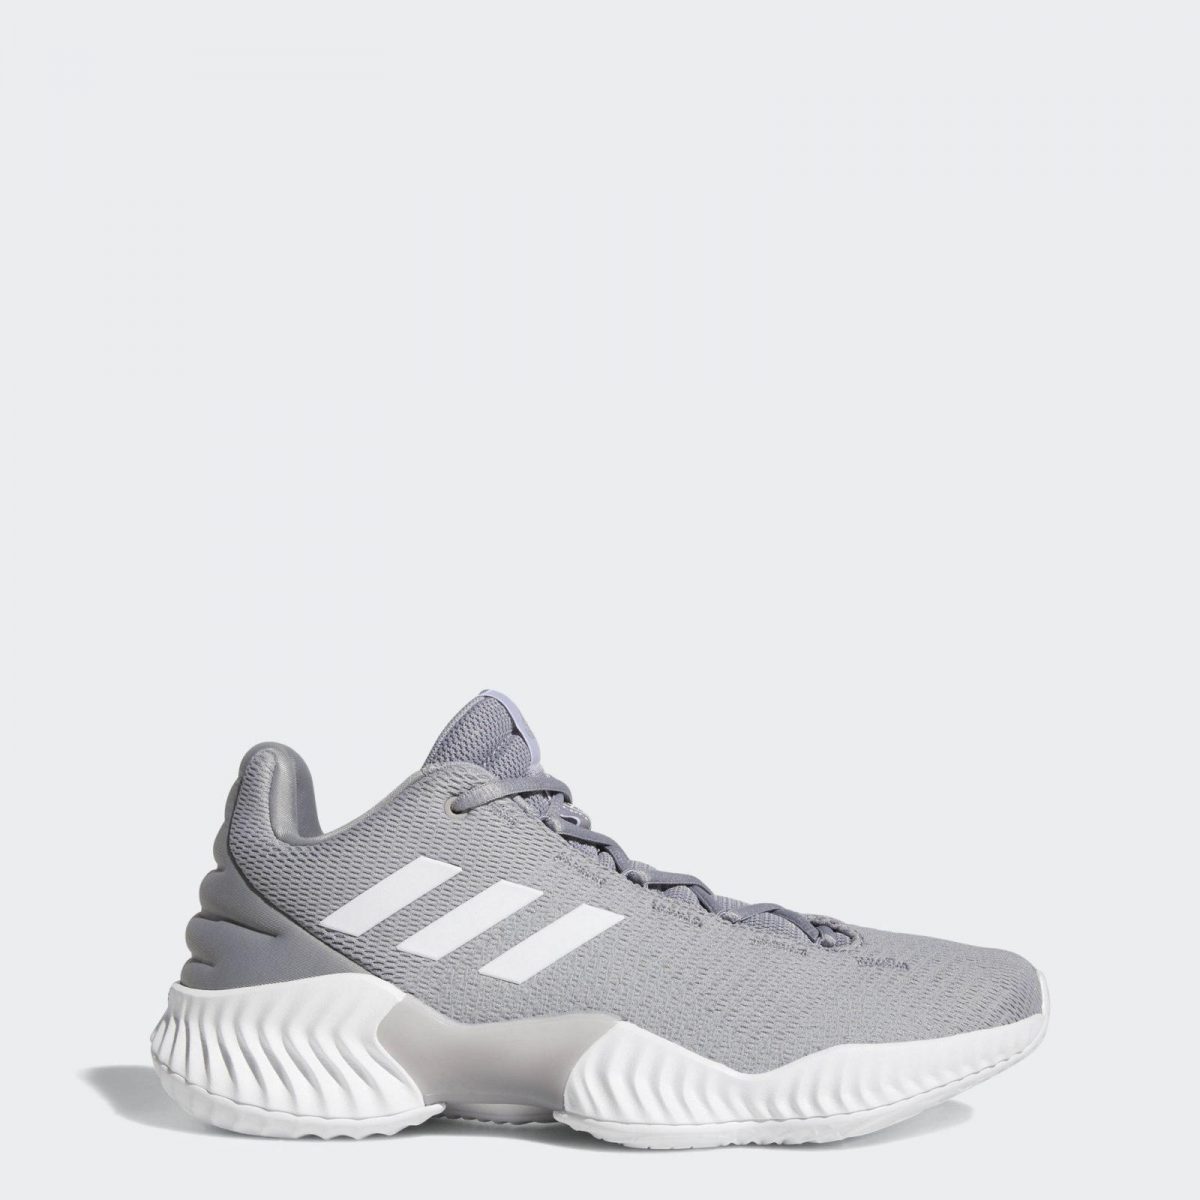 Pro Bounce 2018 Low adidas Performance (AH2676) - SNEAKER SEARCH